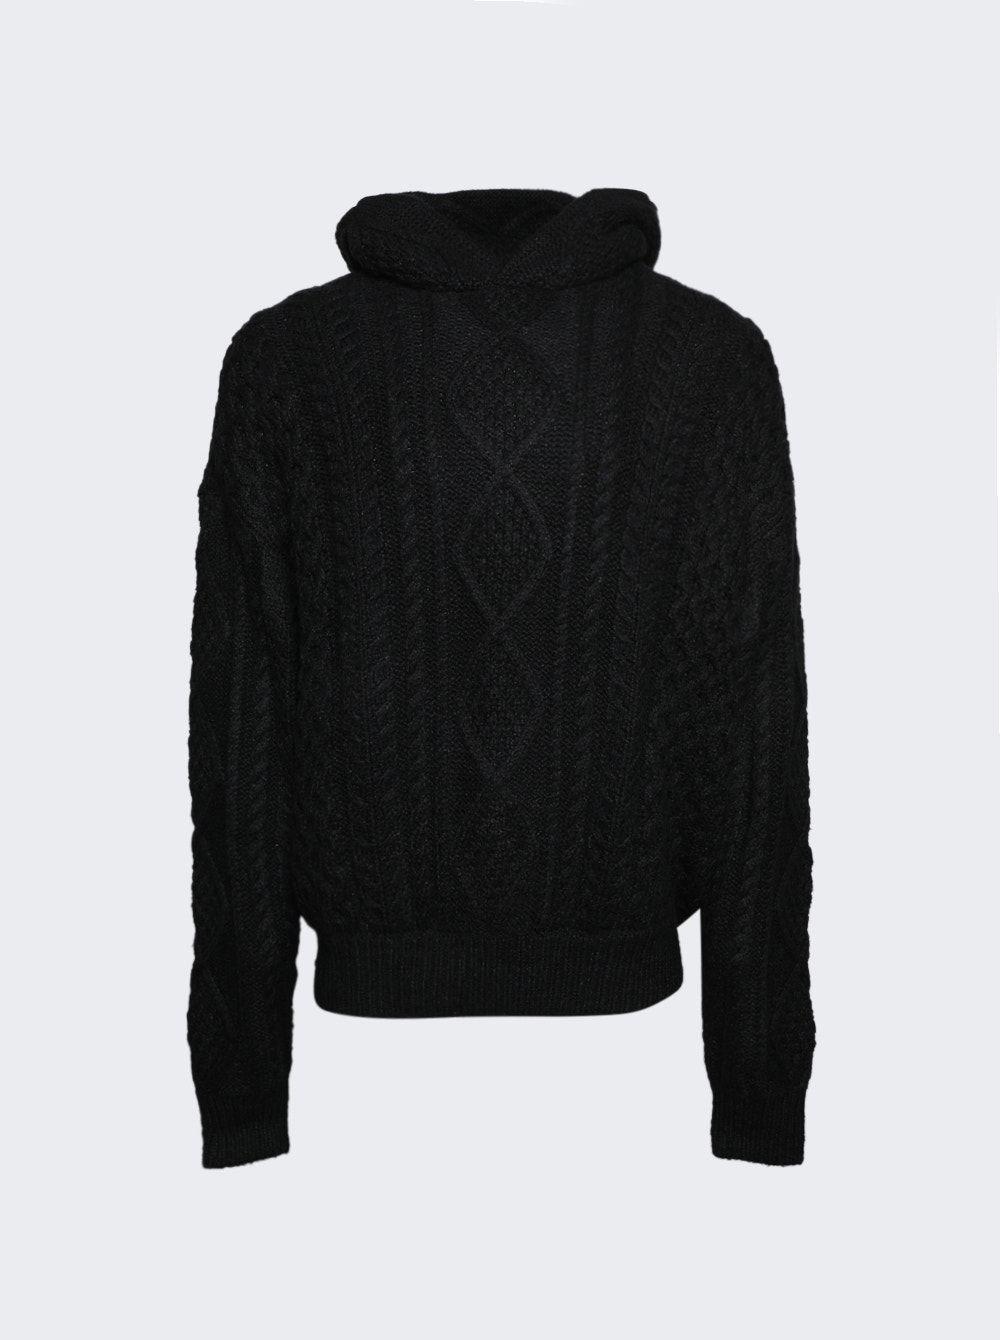 Fear of God ESSENTIALS Cable Knit Hoodie in Black for Men | Lyst